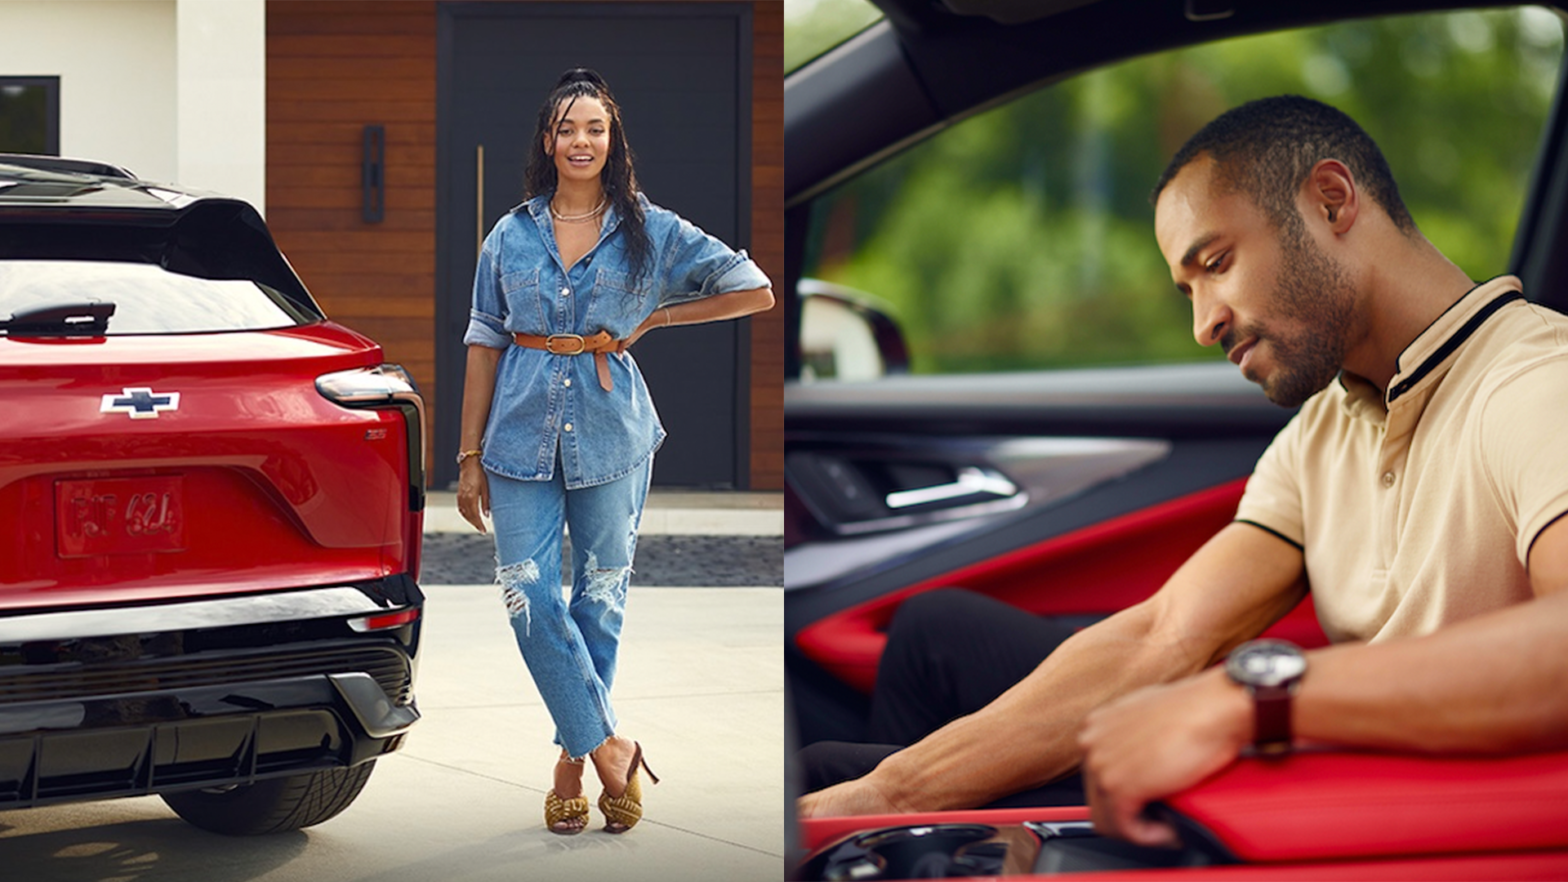 Black Designers Aurora James And Justin Salmon Talk Playing A Part In Chevy's First-Ever Blazer Electric Vehicle